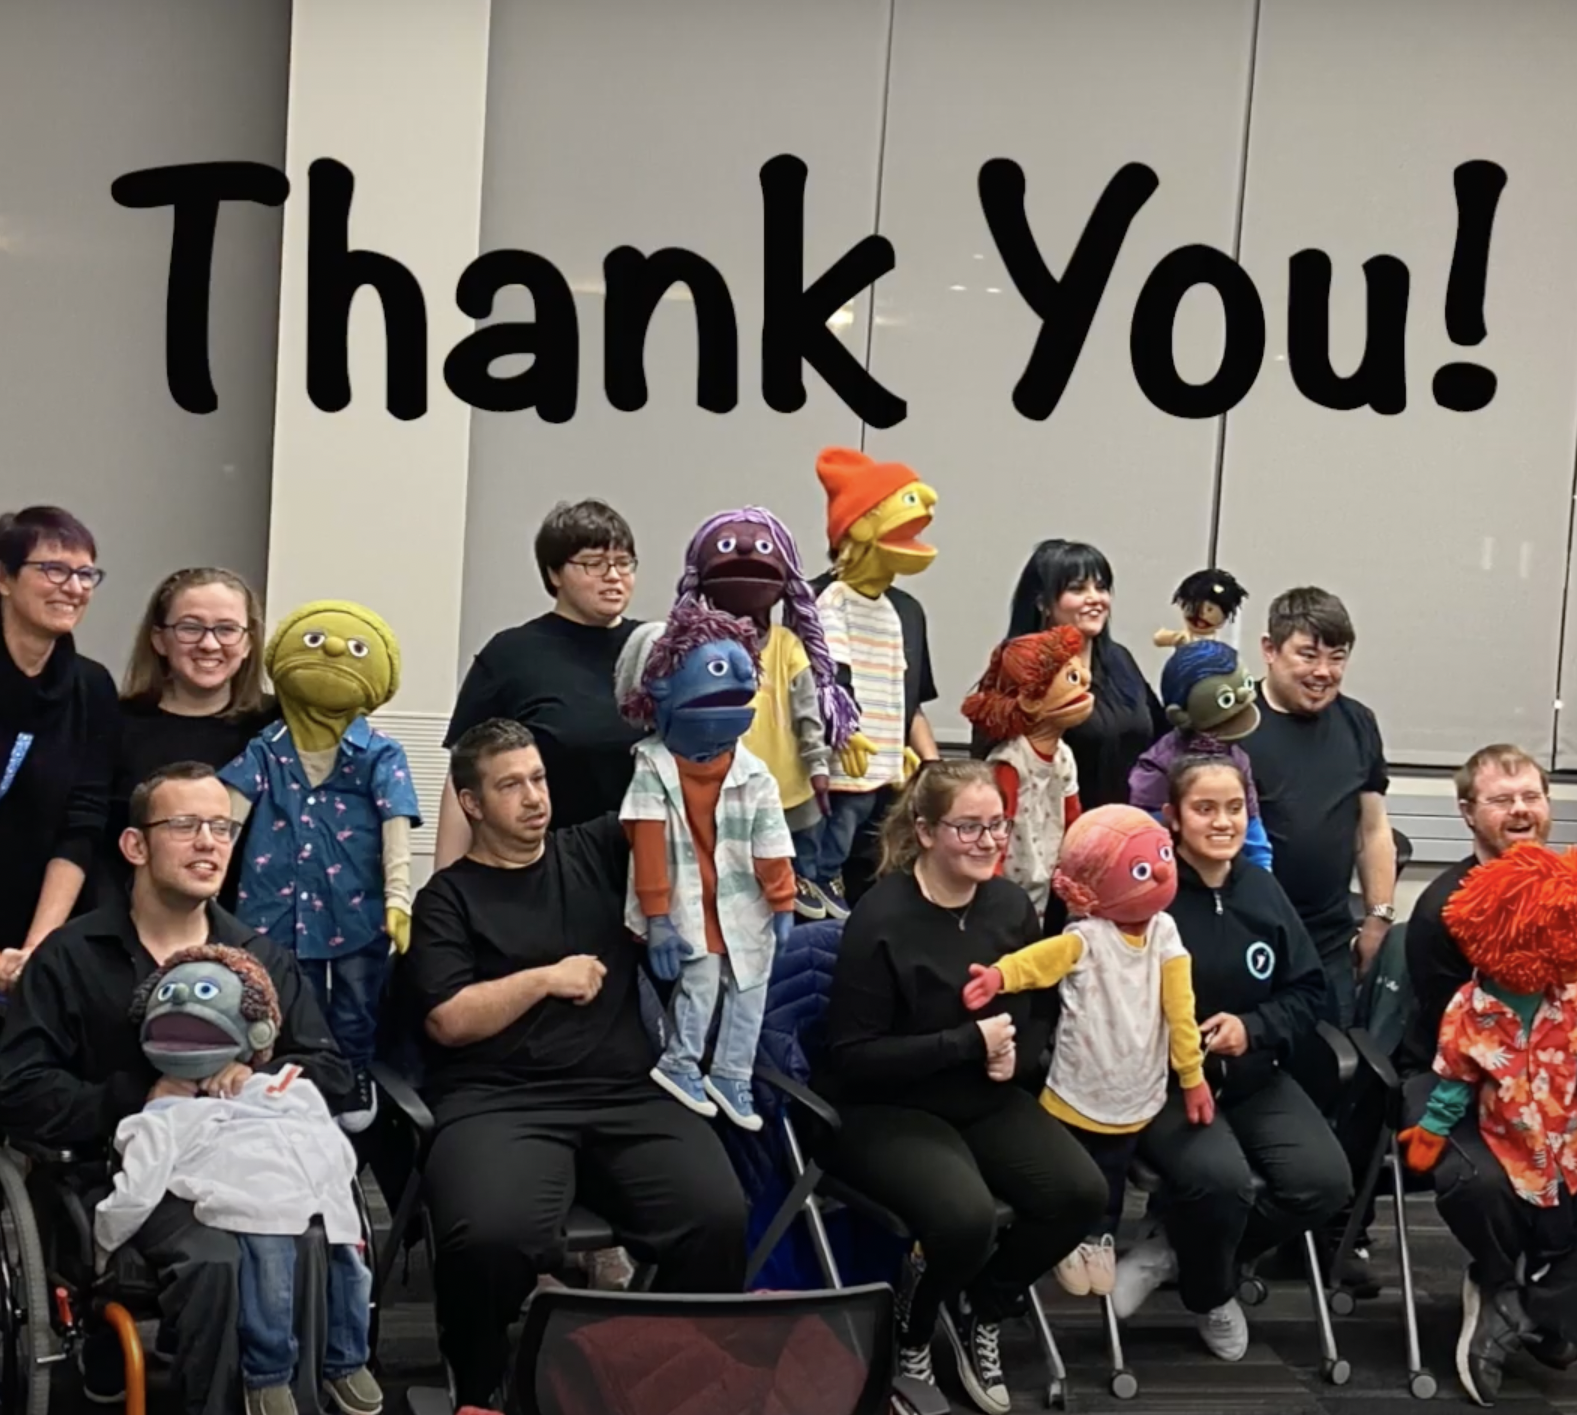 Approximately ten humans wearing black and each holding up a puppet. The puppets appear to be young and are all various bright colors. Text: Thank You